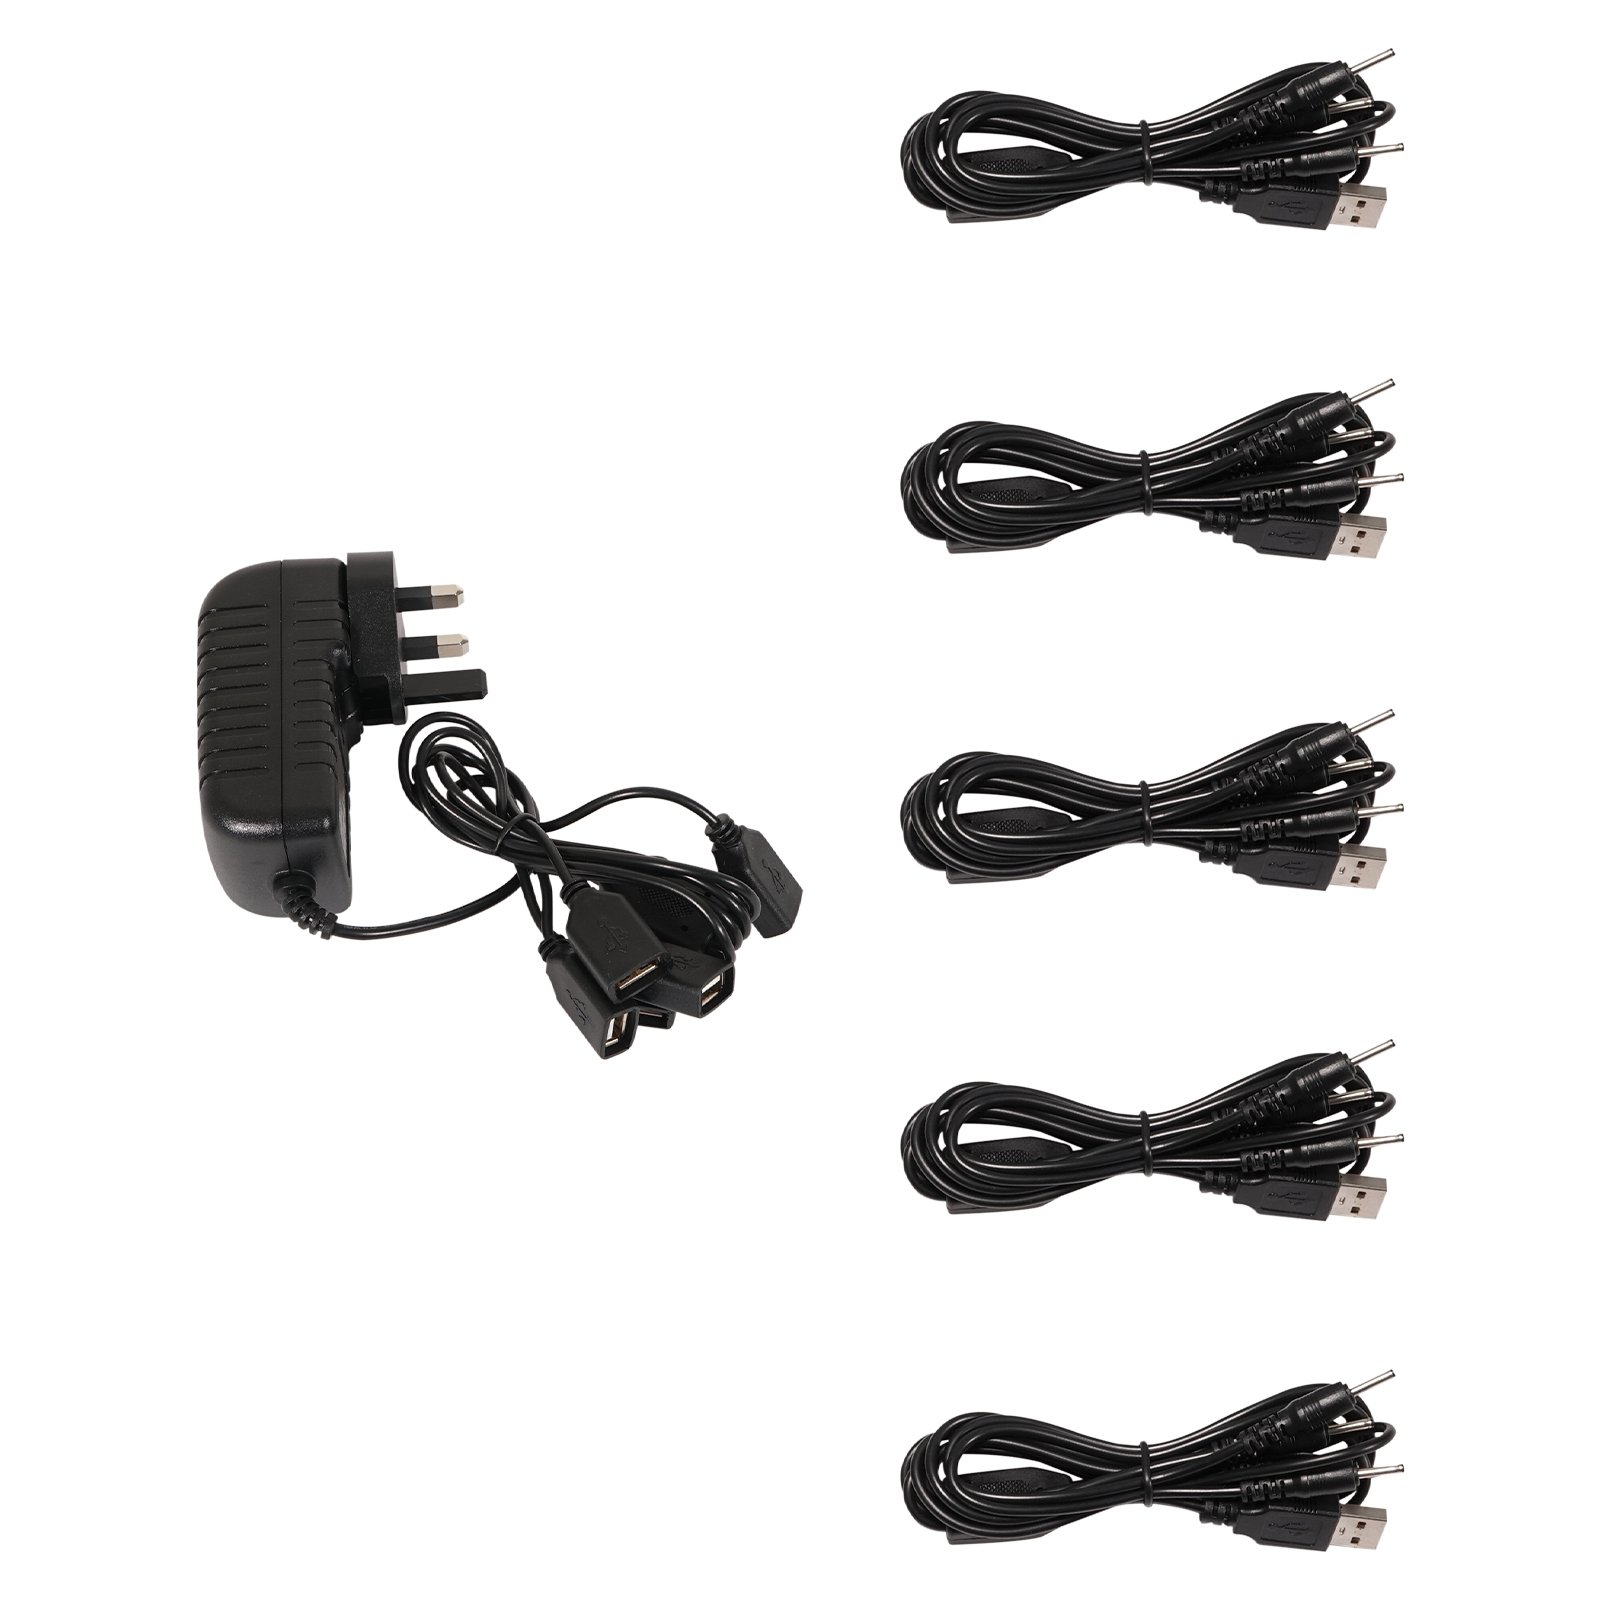  Silent Disco 20 Way Charger SDPROMC